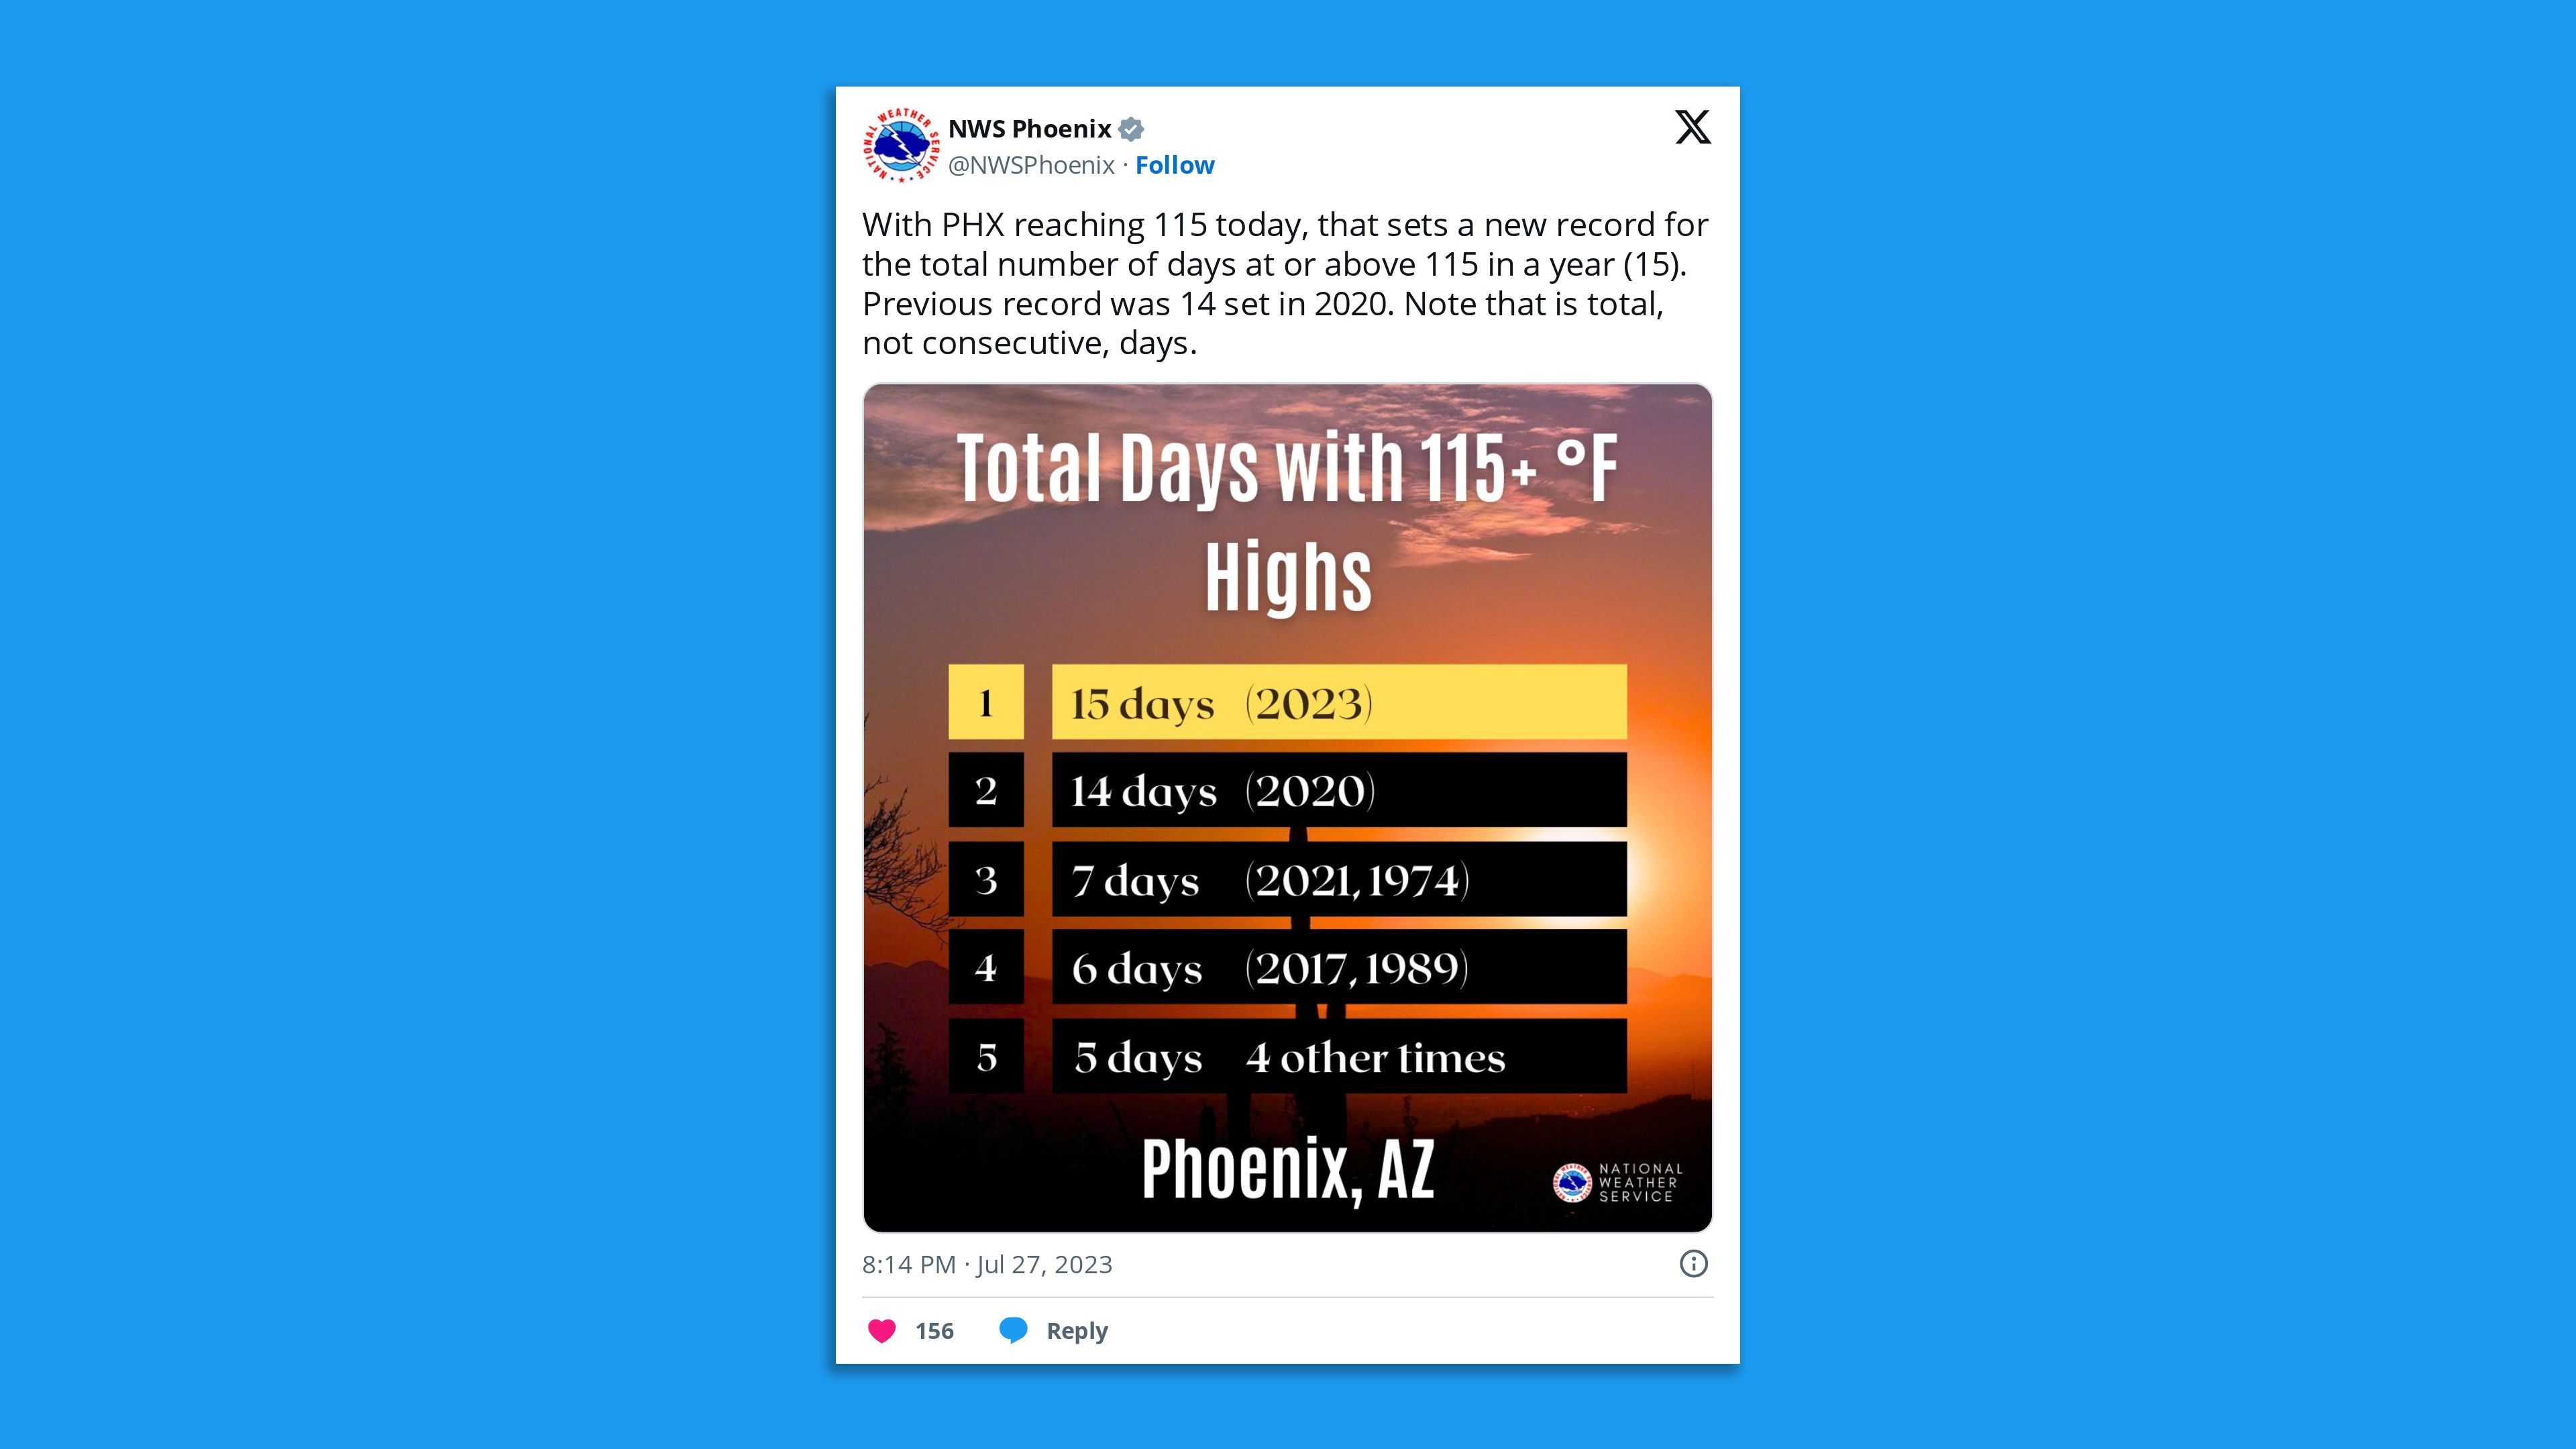 A screenshot of an NWS Phoenix tweet, saying: " With PHX reaching 115 today, that sets a new record for the total number of days at or above 115 in a year (15). Previous record was 14 set in 2020. Note that is total, not consecutive, days."